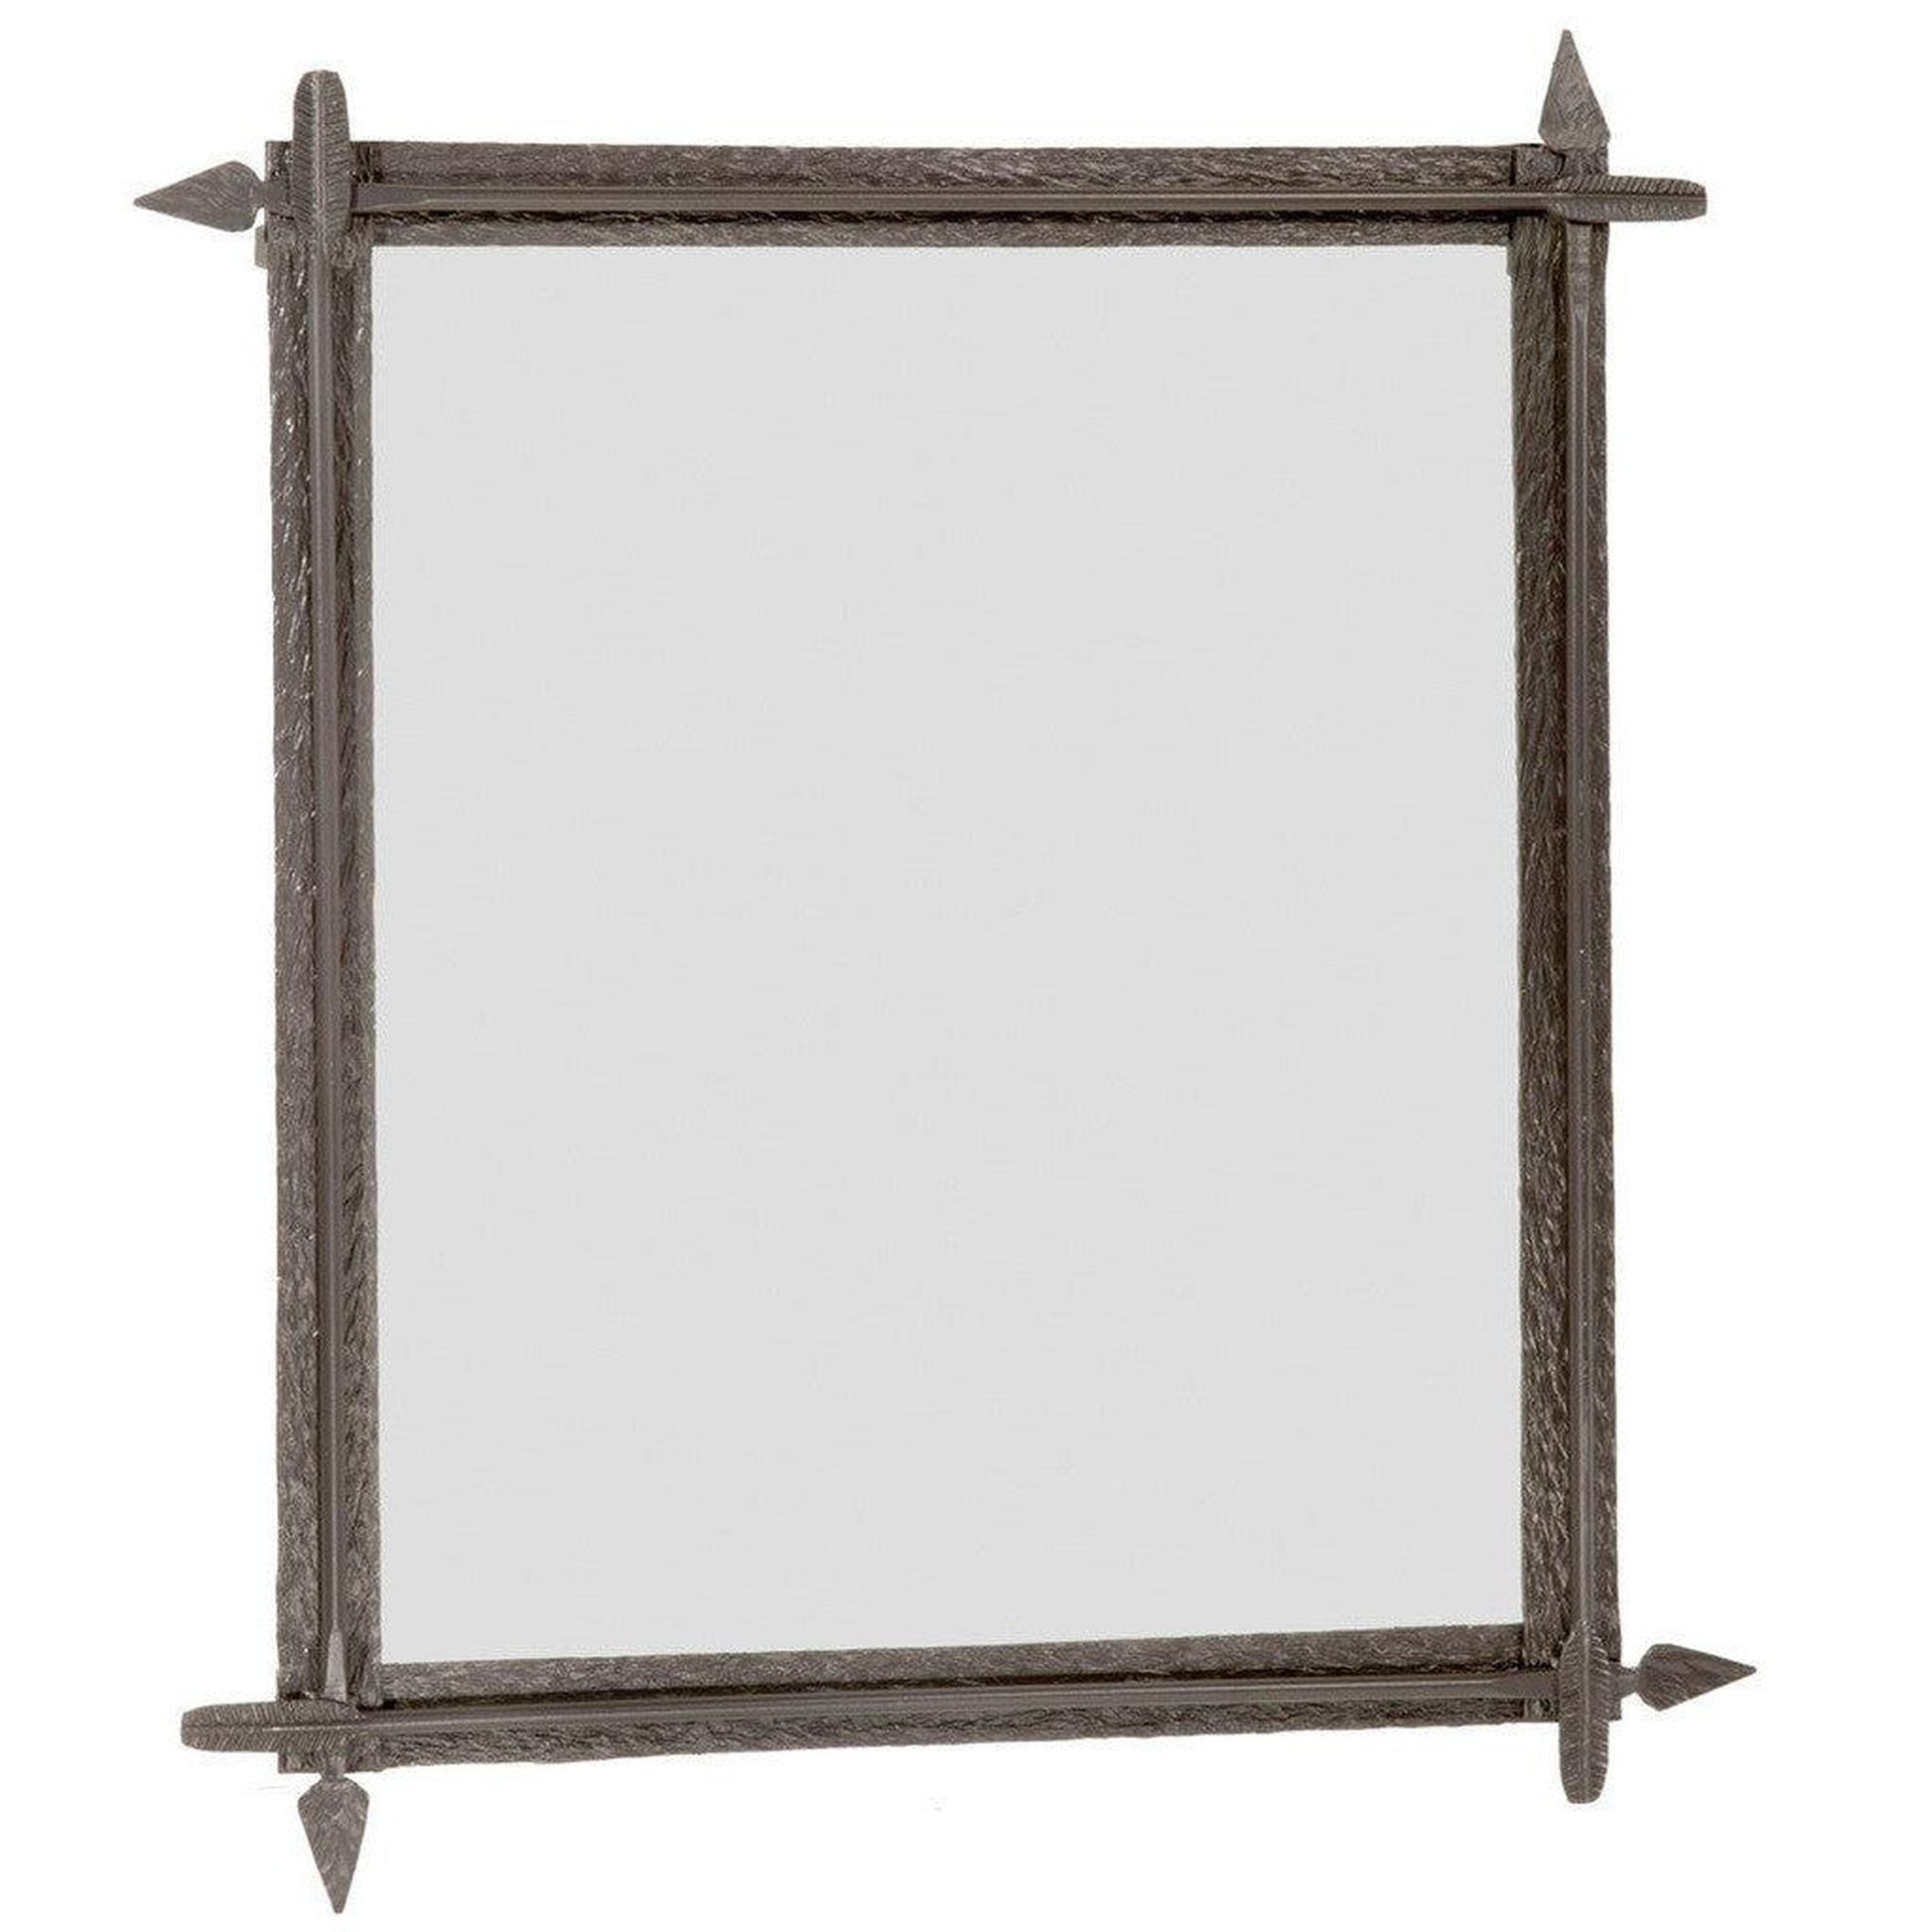 Stone County Ironworks Quapaw 28" x 32" Small Natural Black Iron Wall Mirror With Copper Iron Accent